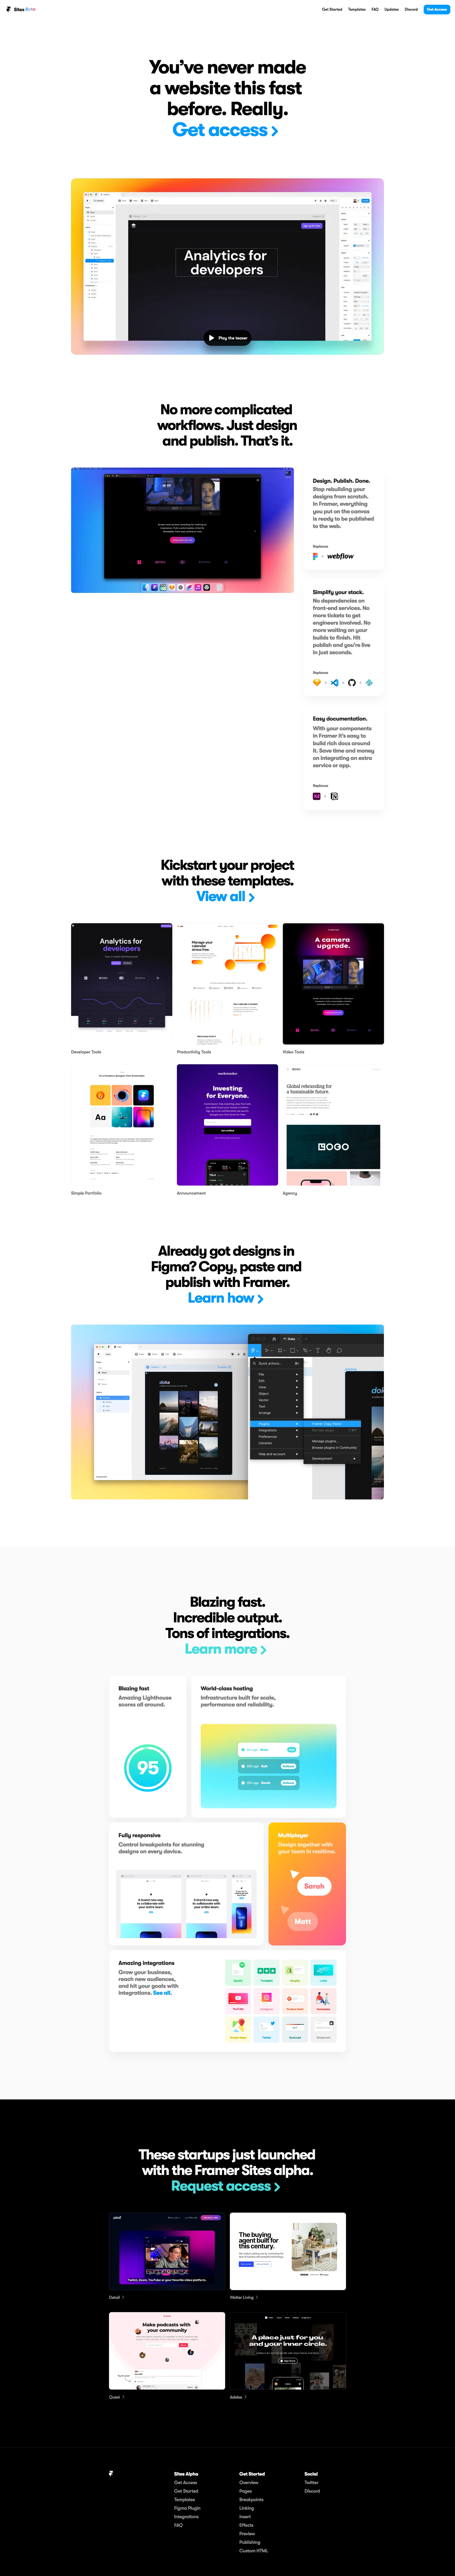 Framer Sites Landing Page Example: Design beautiful websites in record time. You’ve never made a website this fast before. Really.